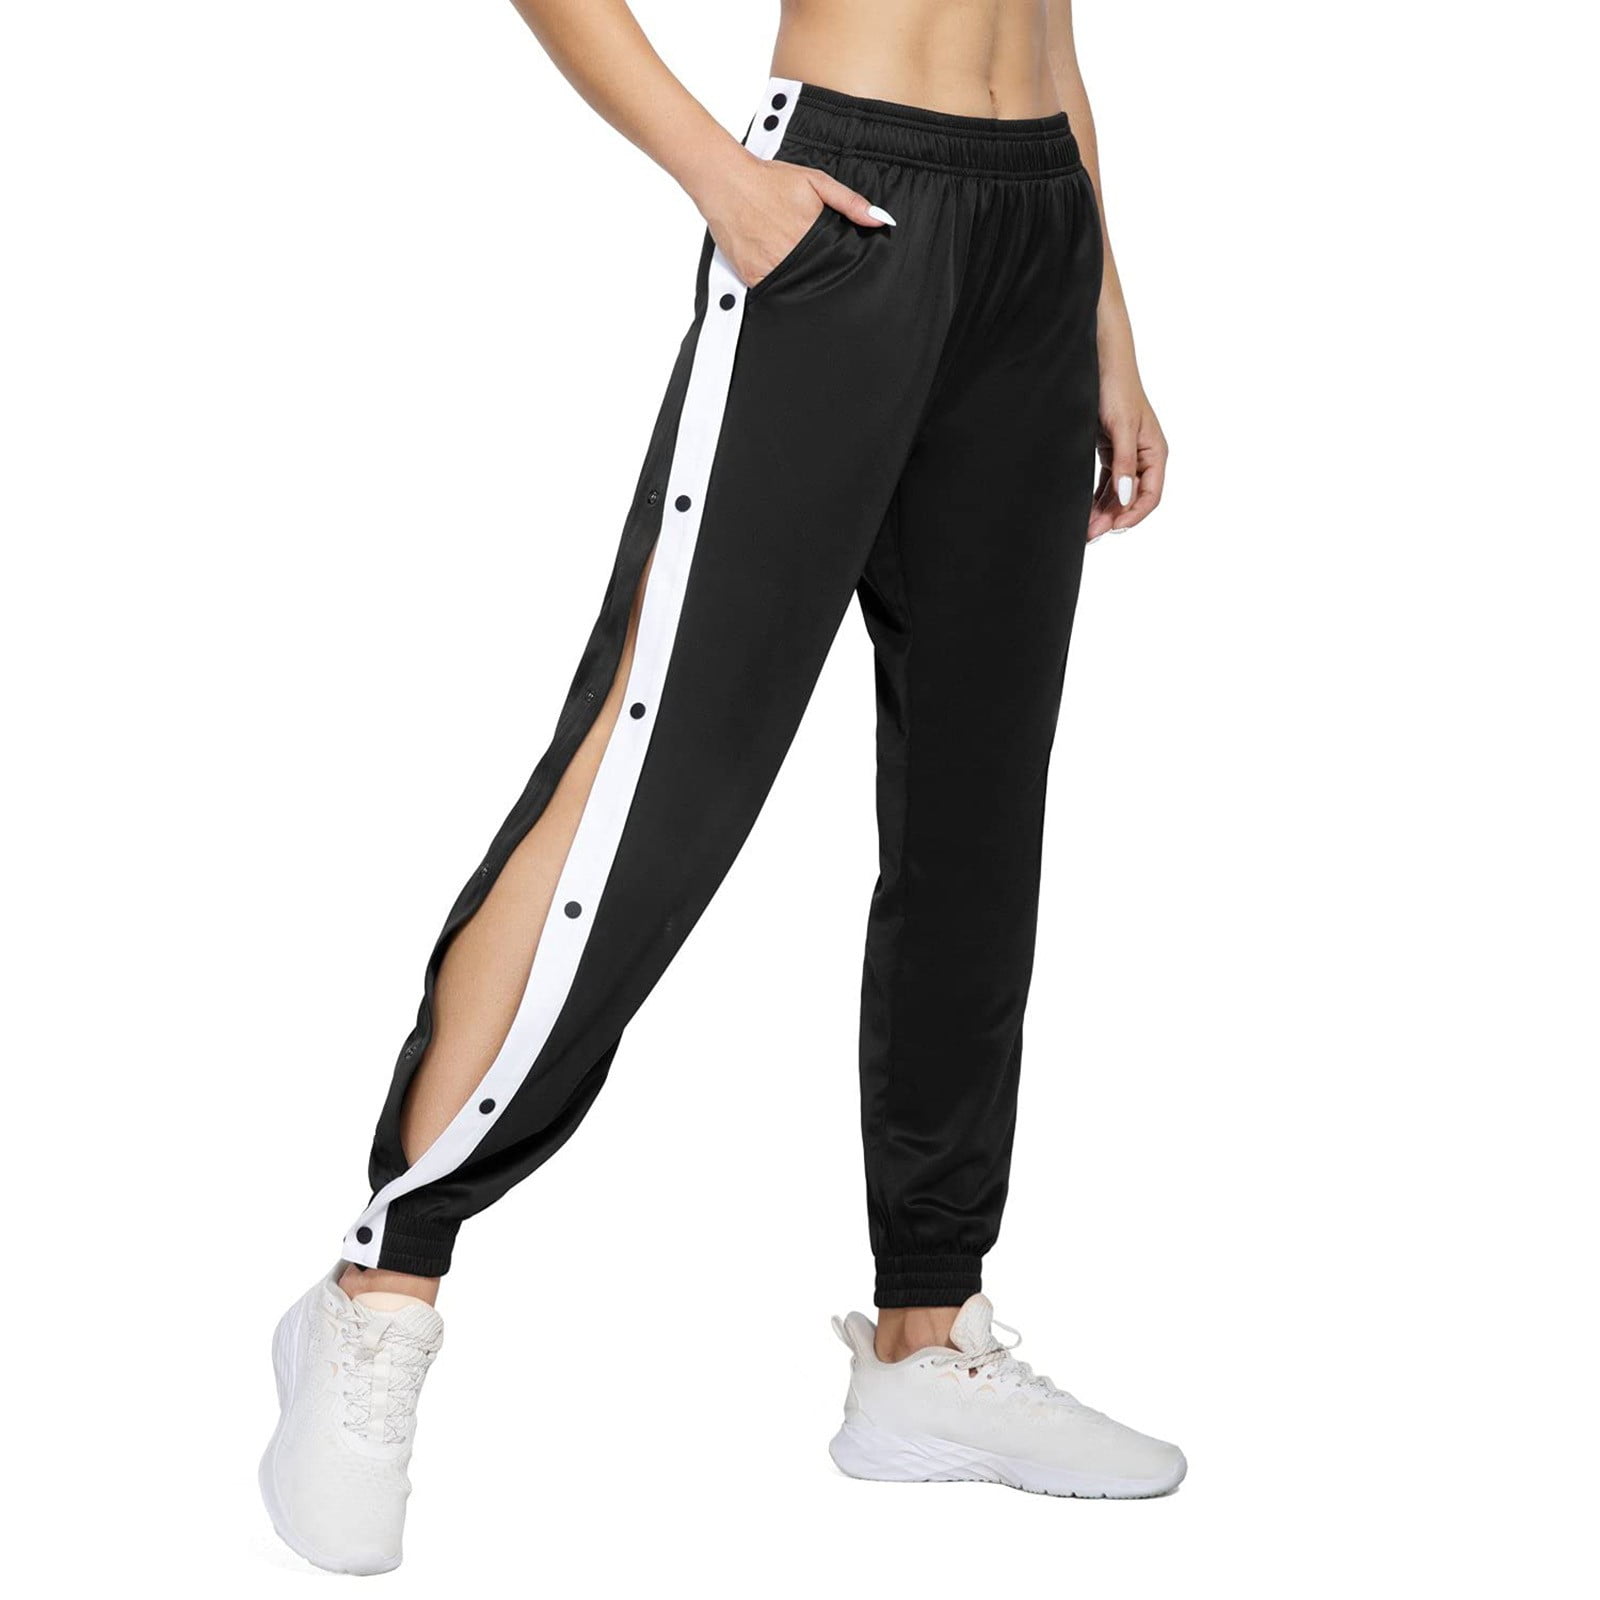 Yoga Pants Women's Tear Away Warm Up Pants Active Workout Tapered ...